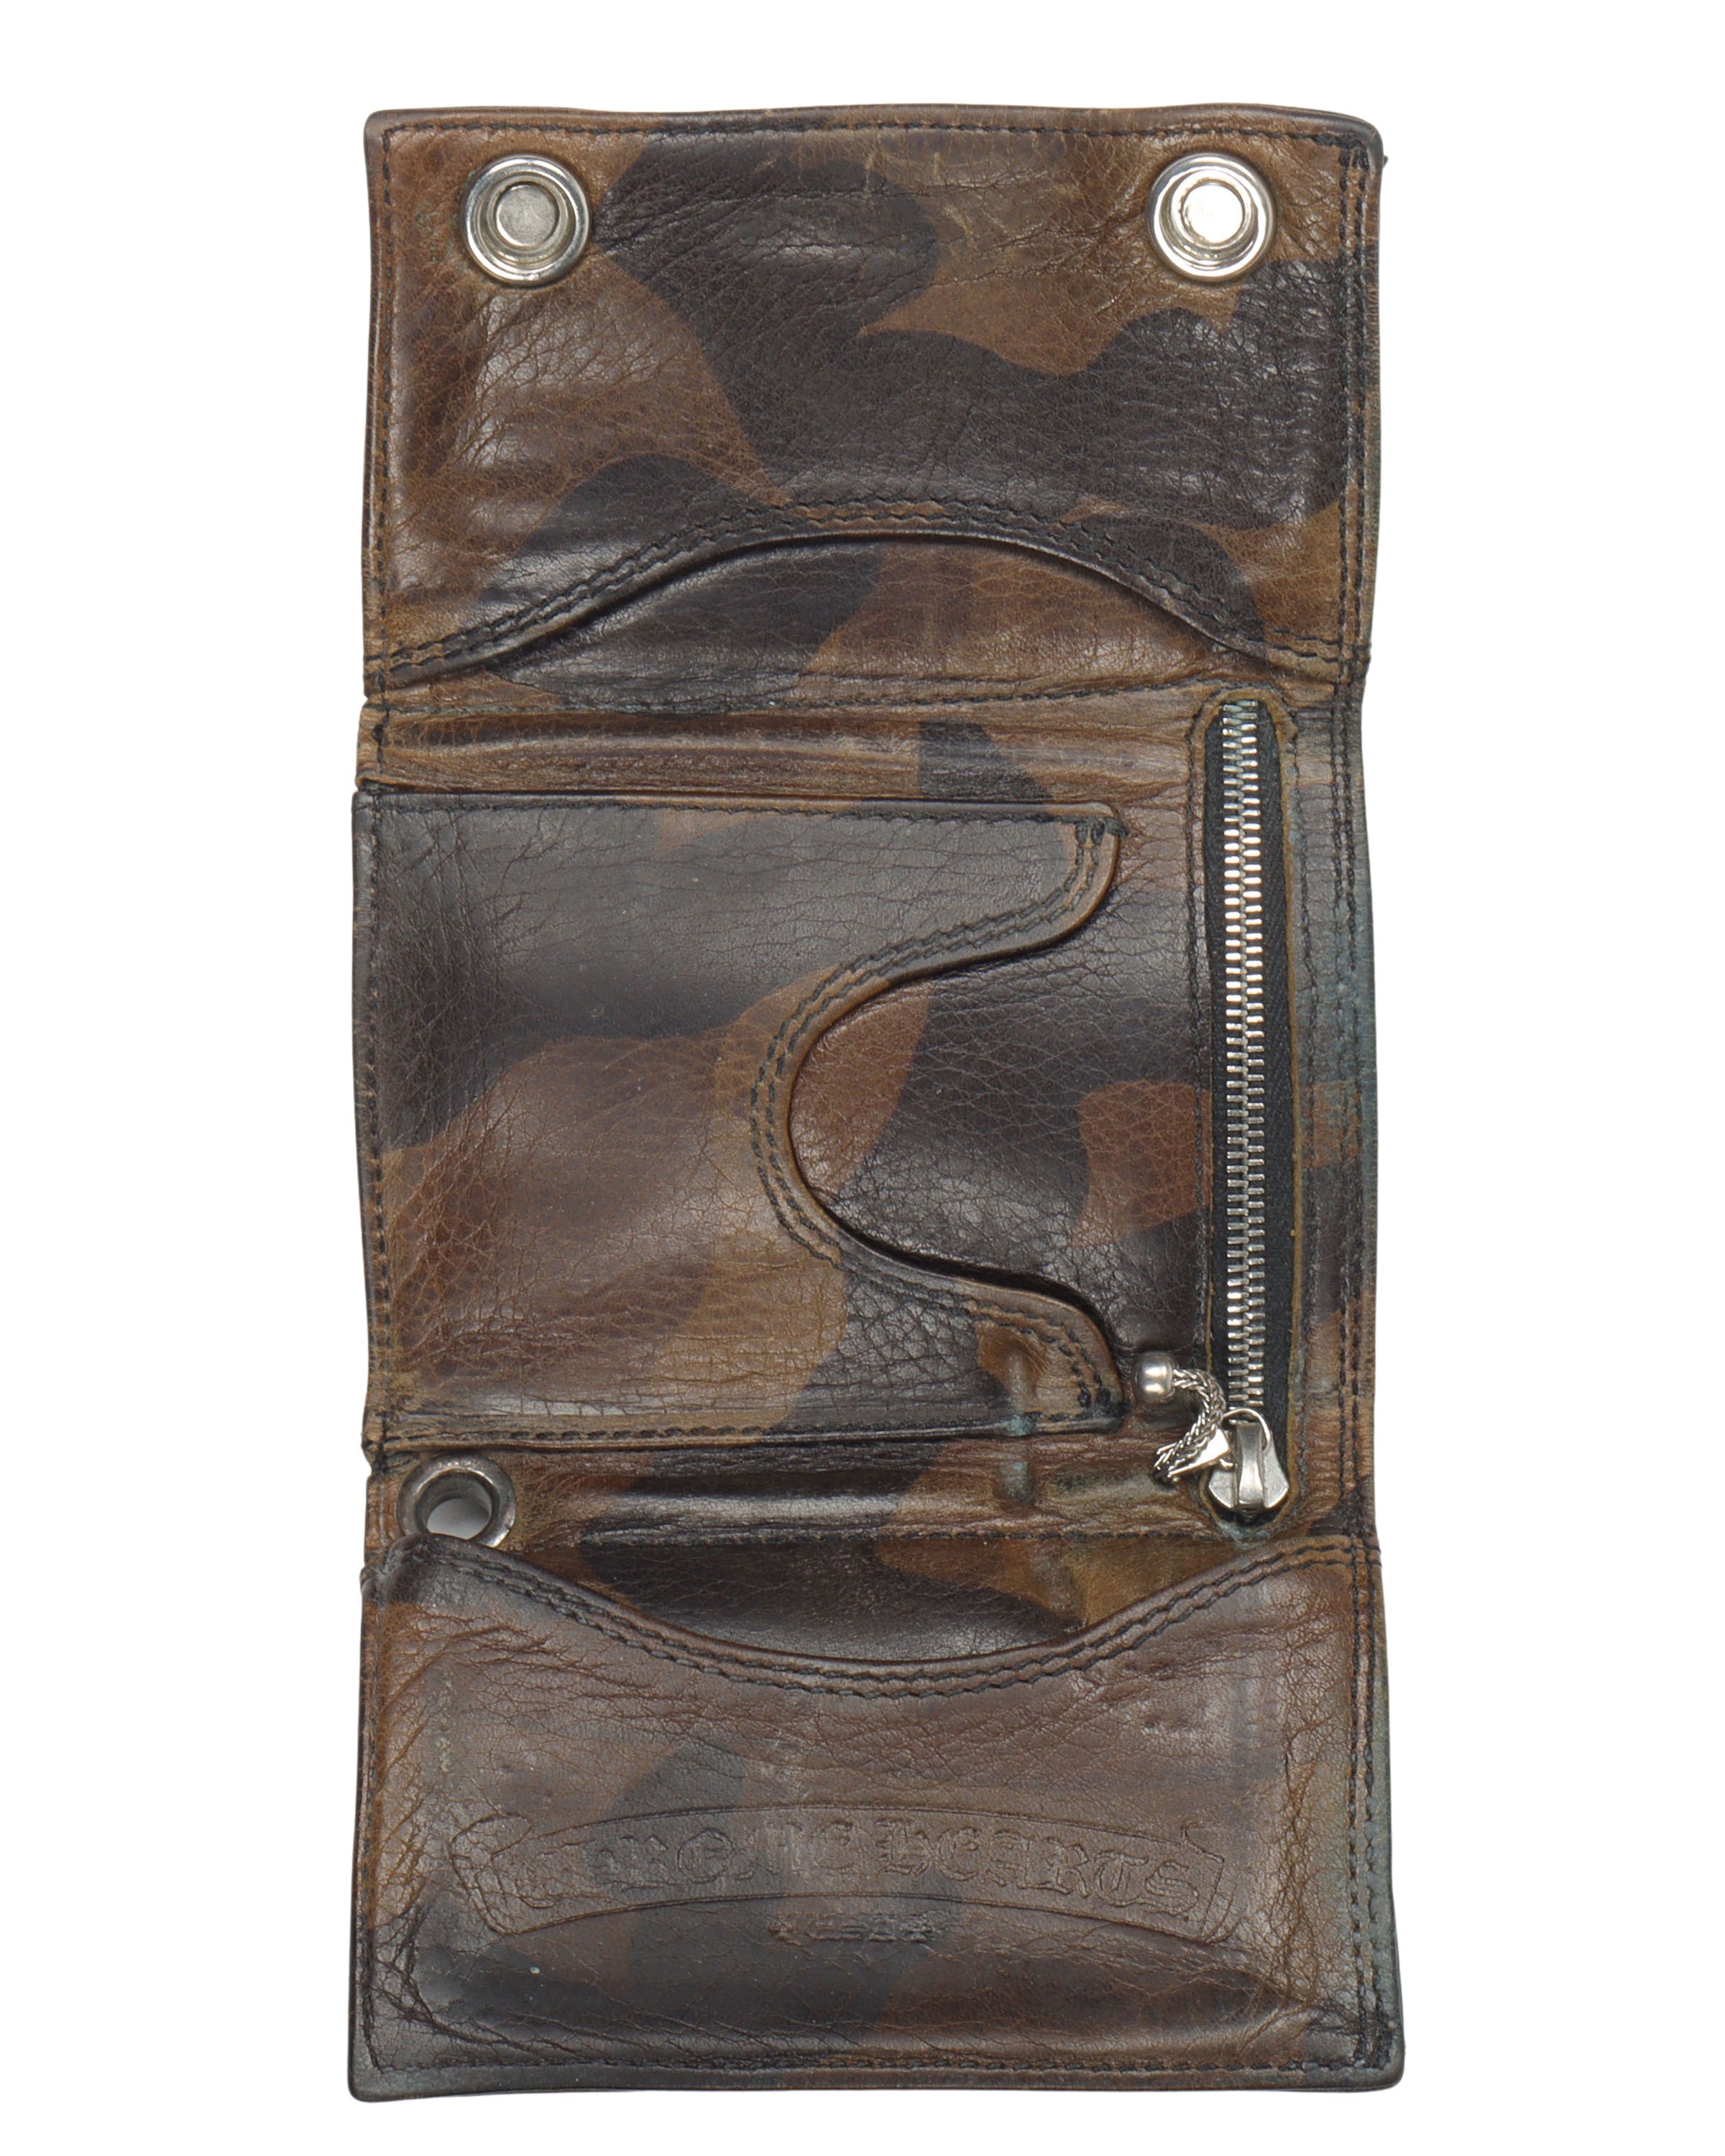 Camouflage Cross Patch Wallet